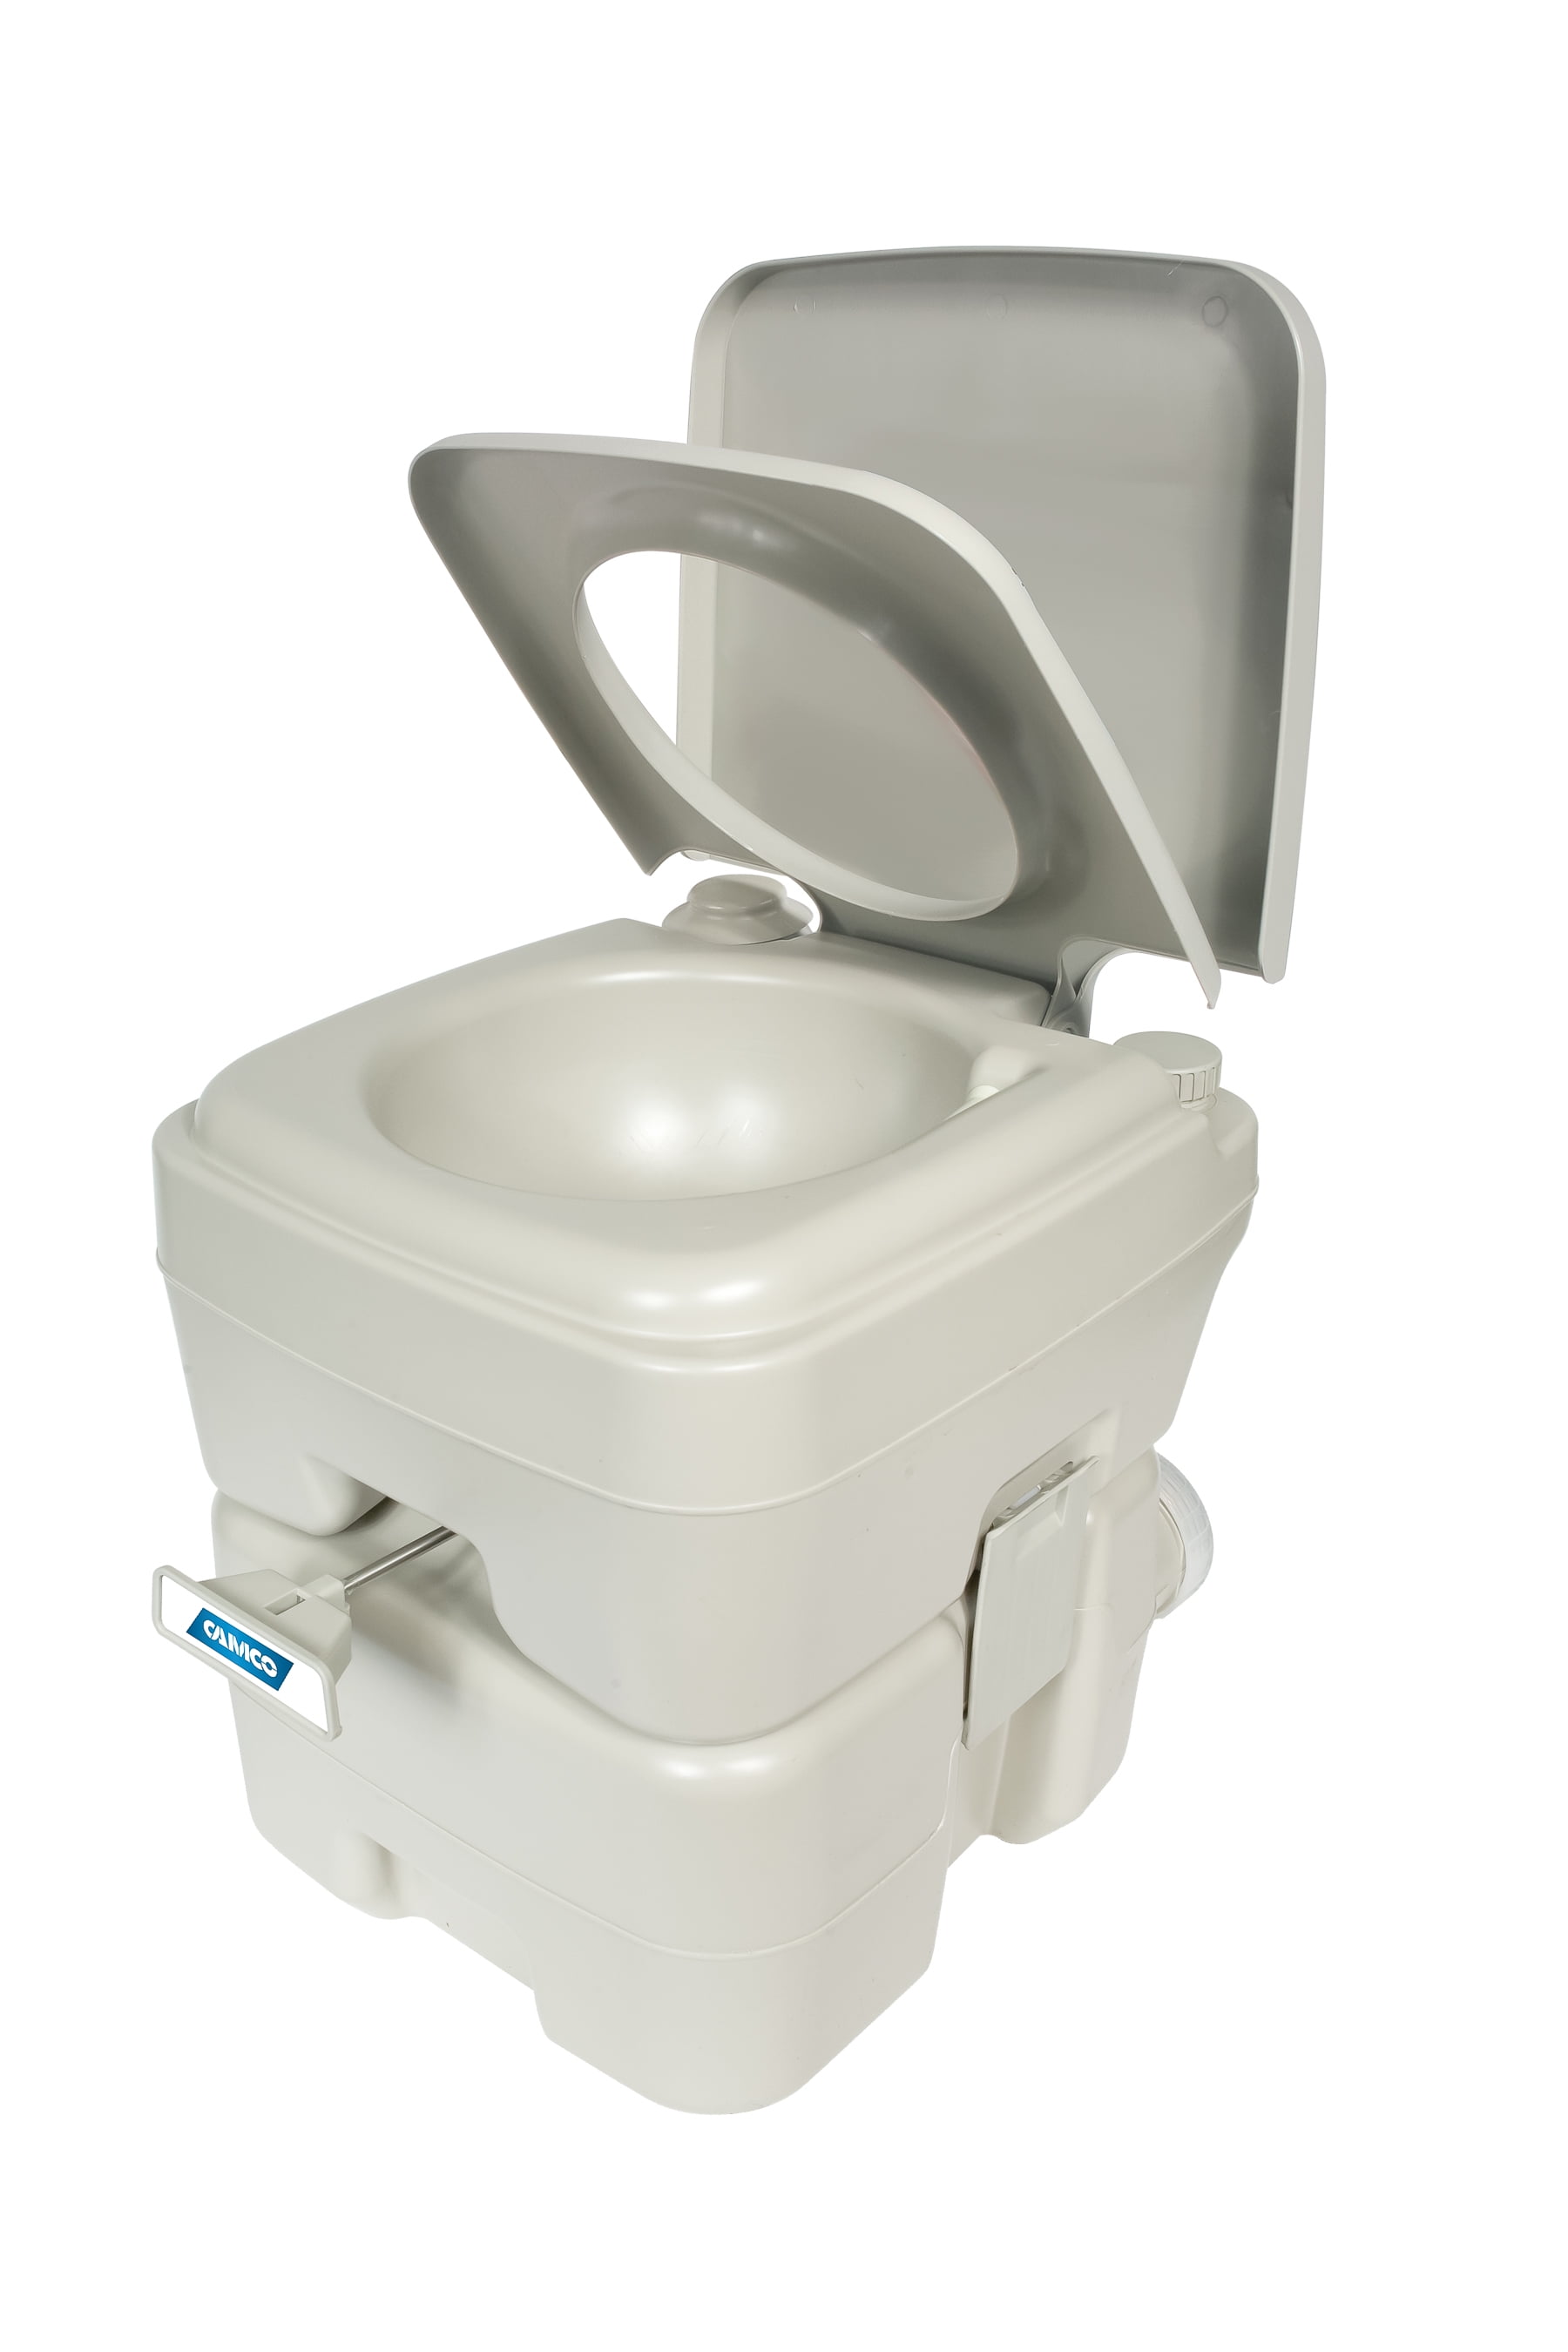 Hiking Traveling 5.3 Gallon Portable Toilet for Boating RV Splash-free and No Leakage Outdoor RV Toilet 